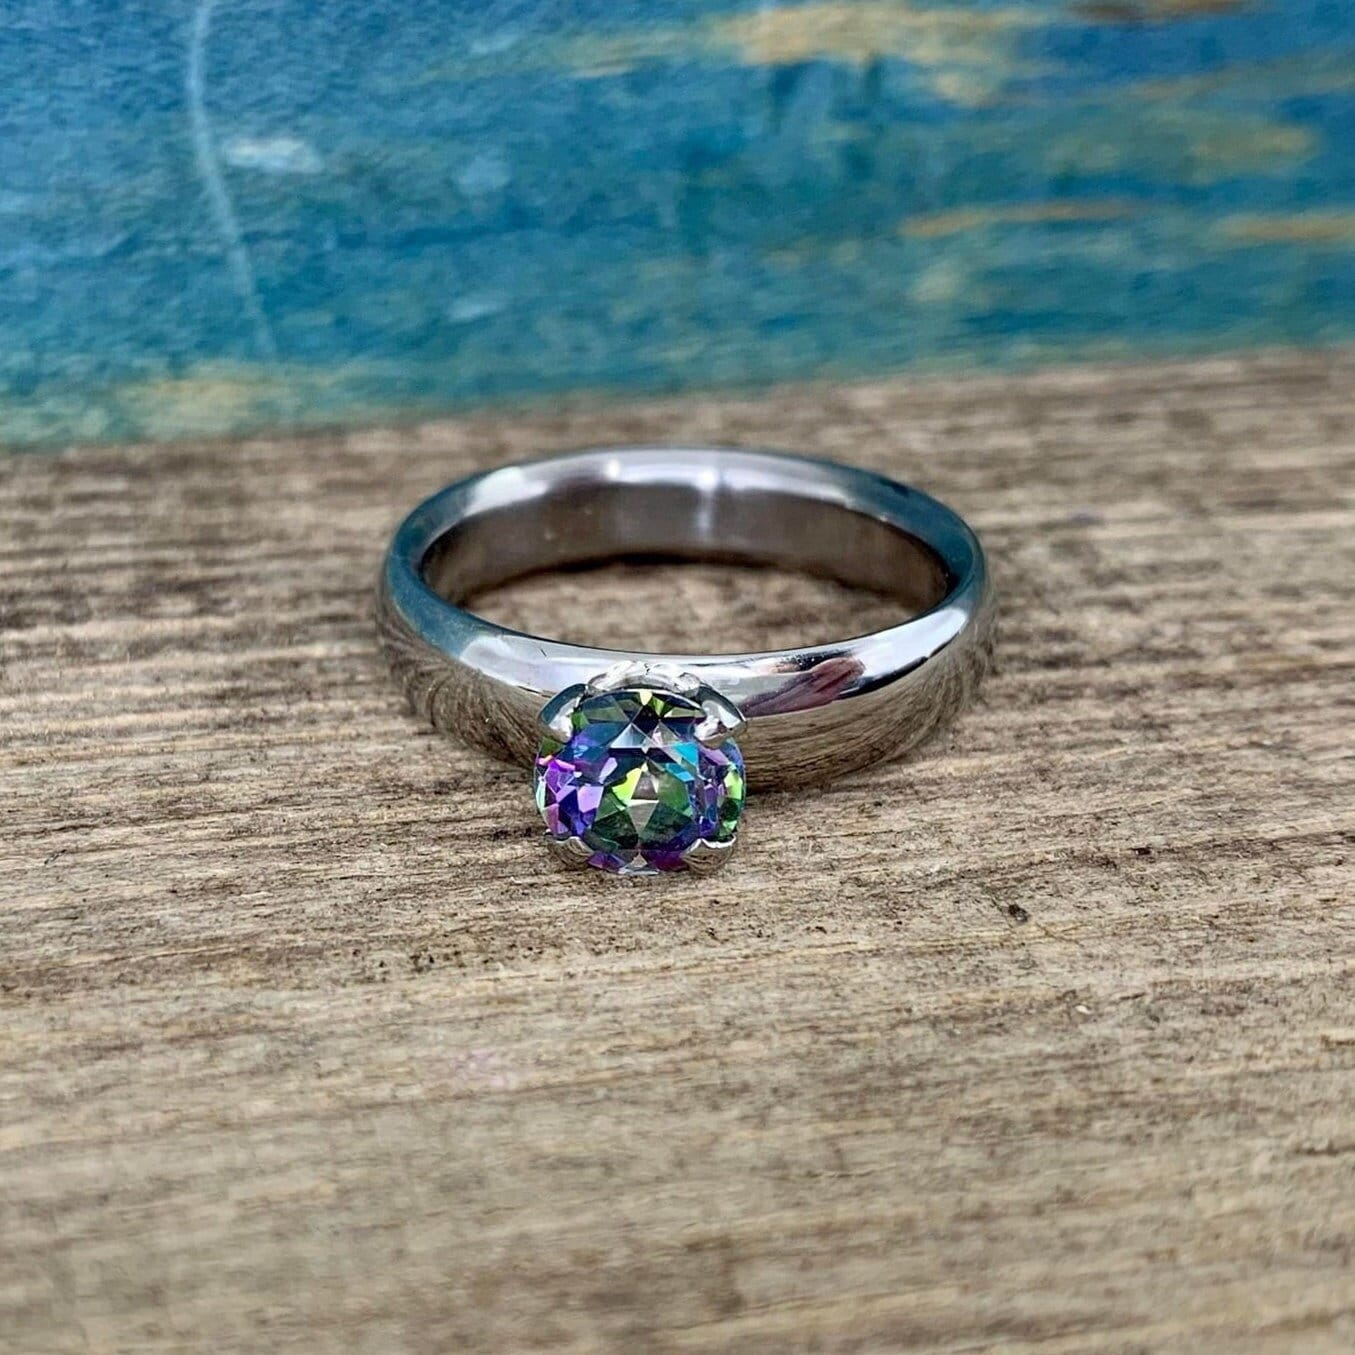 Vintage Mystic Topaz Engagement Ring, Unique 14k Solid Gold Diamond Ring,  Moissanite Proposal Ring, Mystic Topaz Wedding Ring, Dainty Ring - Etsy